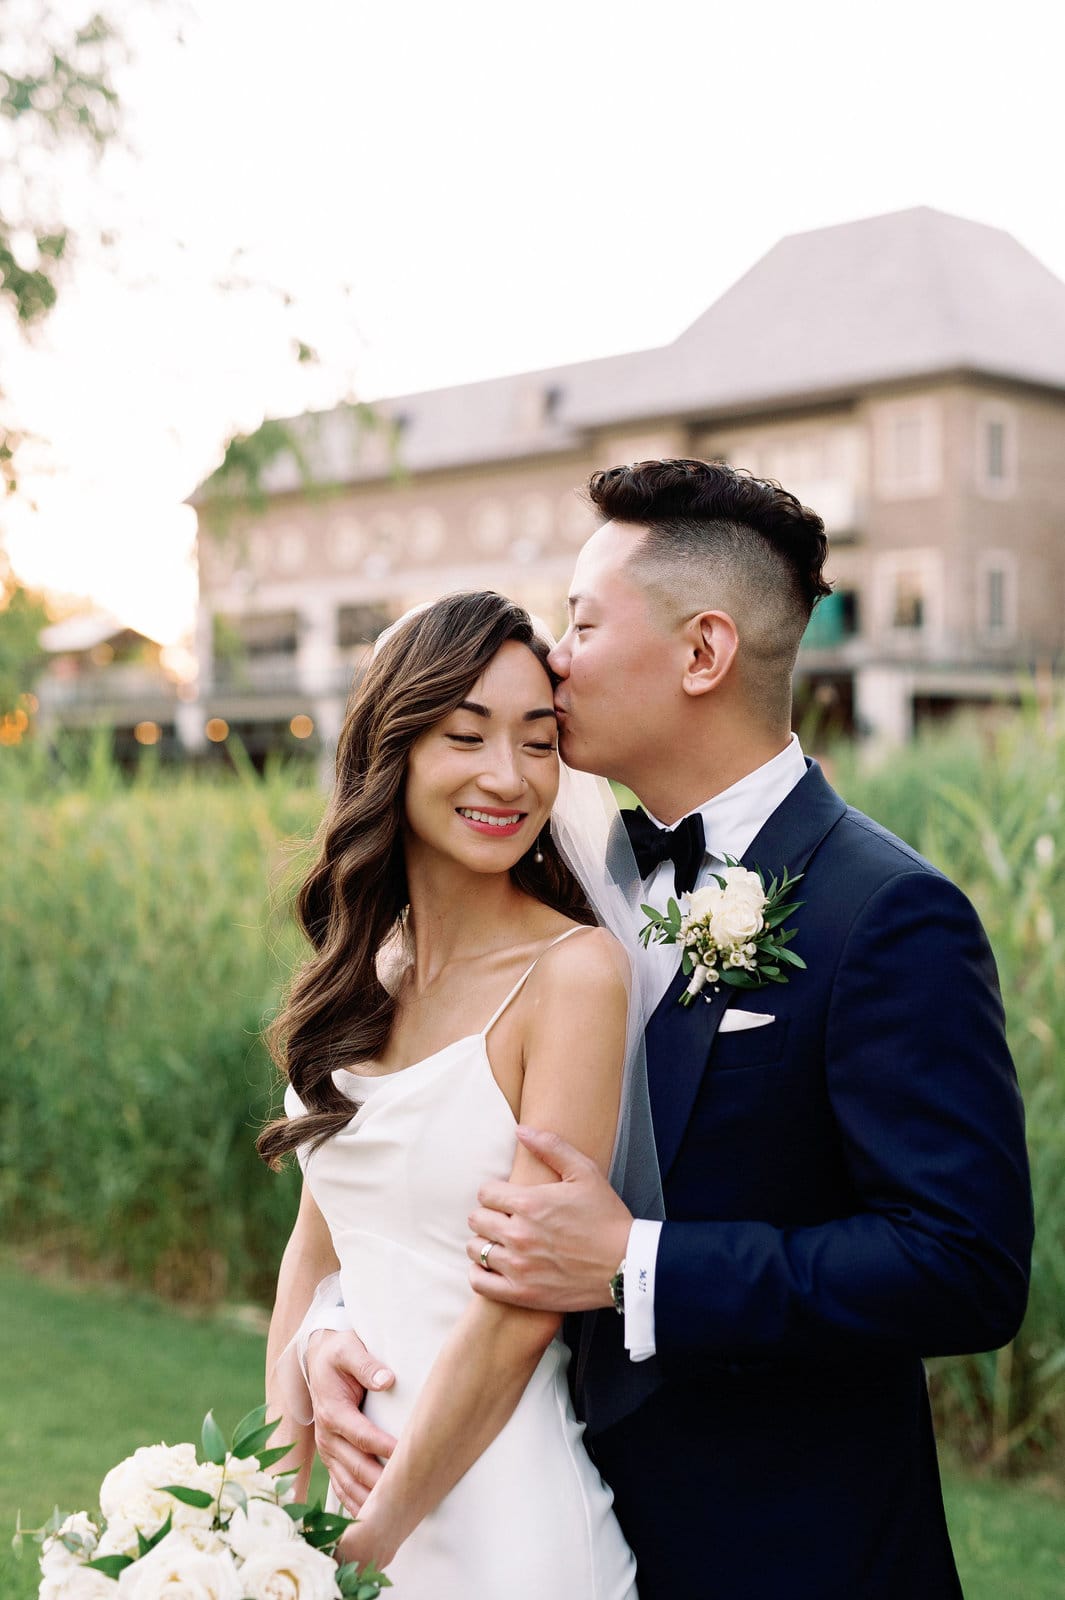 Bride and Groom Editorial Golden Hour Sunset Portraits Cotton Candy Sky In Love Toronto at Arlington Estate Wedding Venue, Modern Romantic Summer Intimate Elopement Jacqueline James Photography